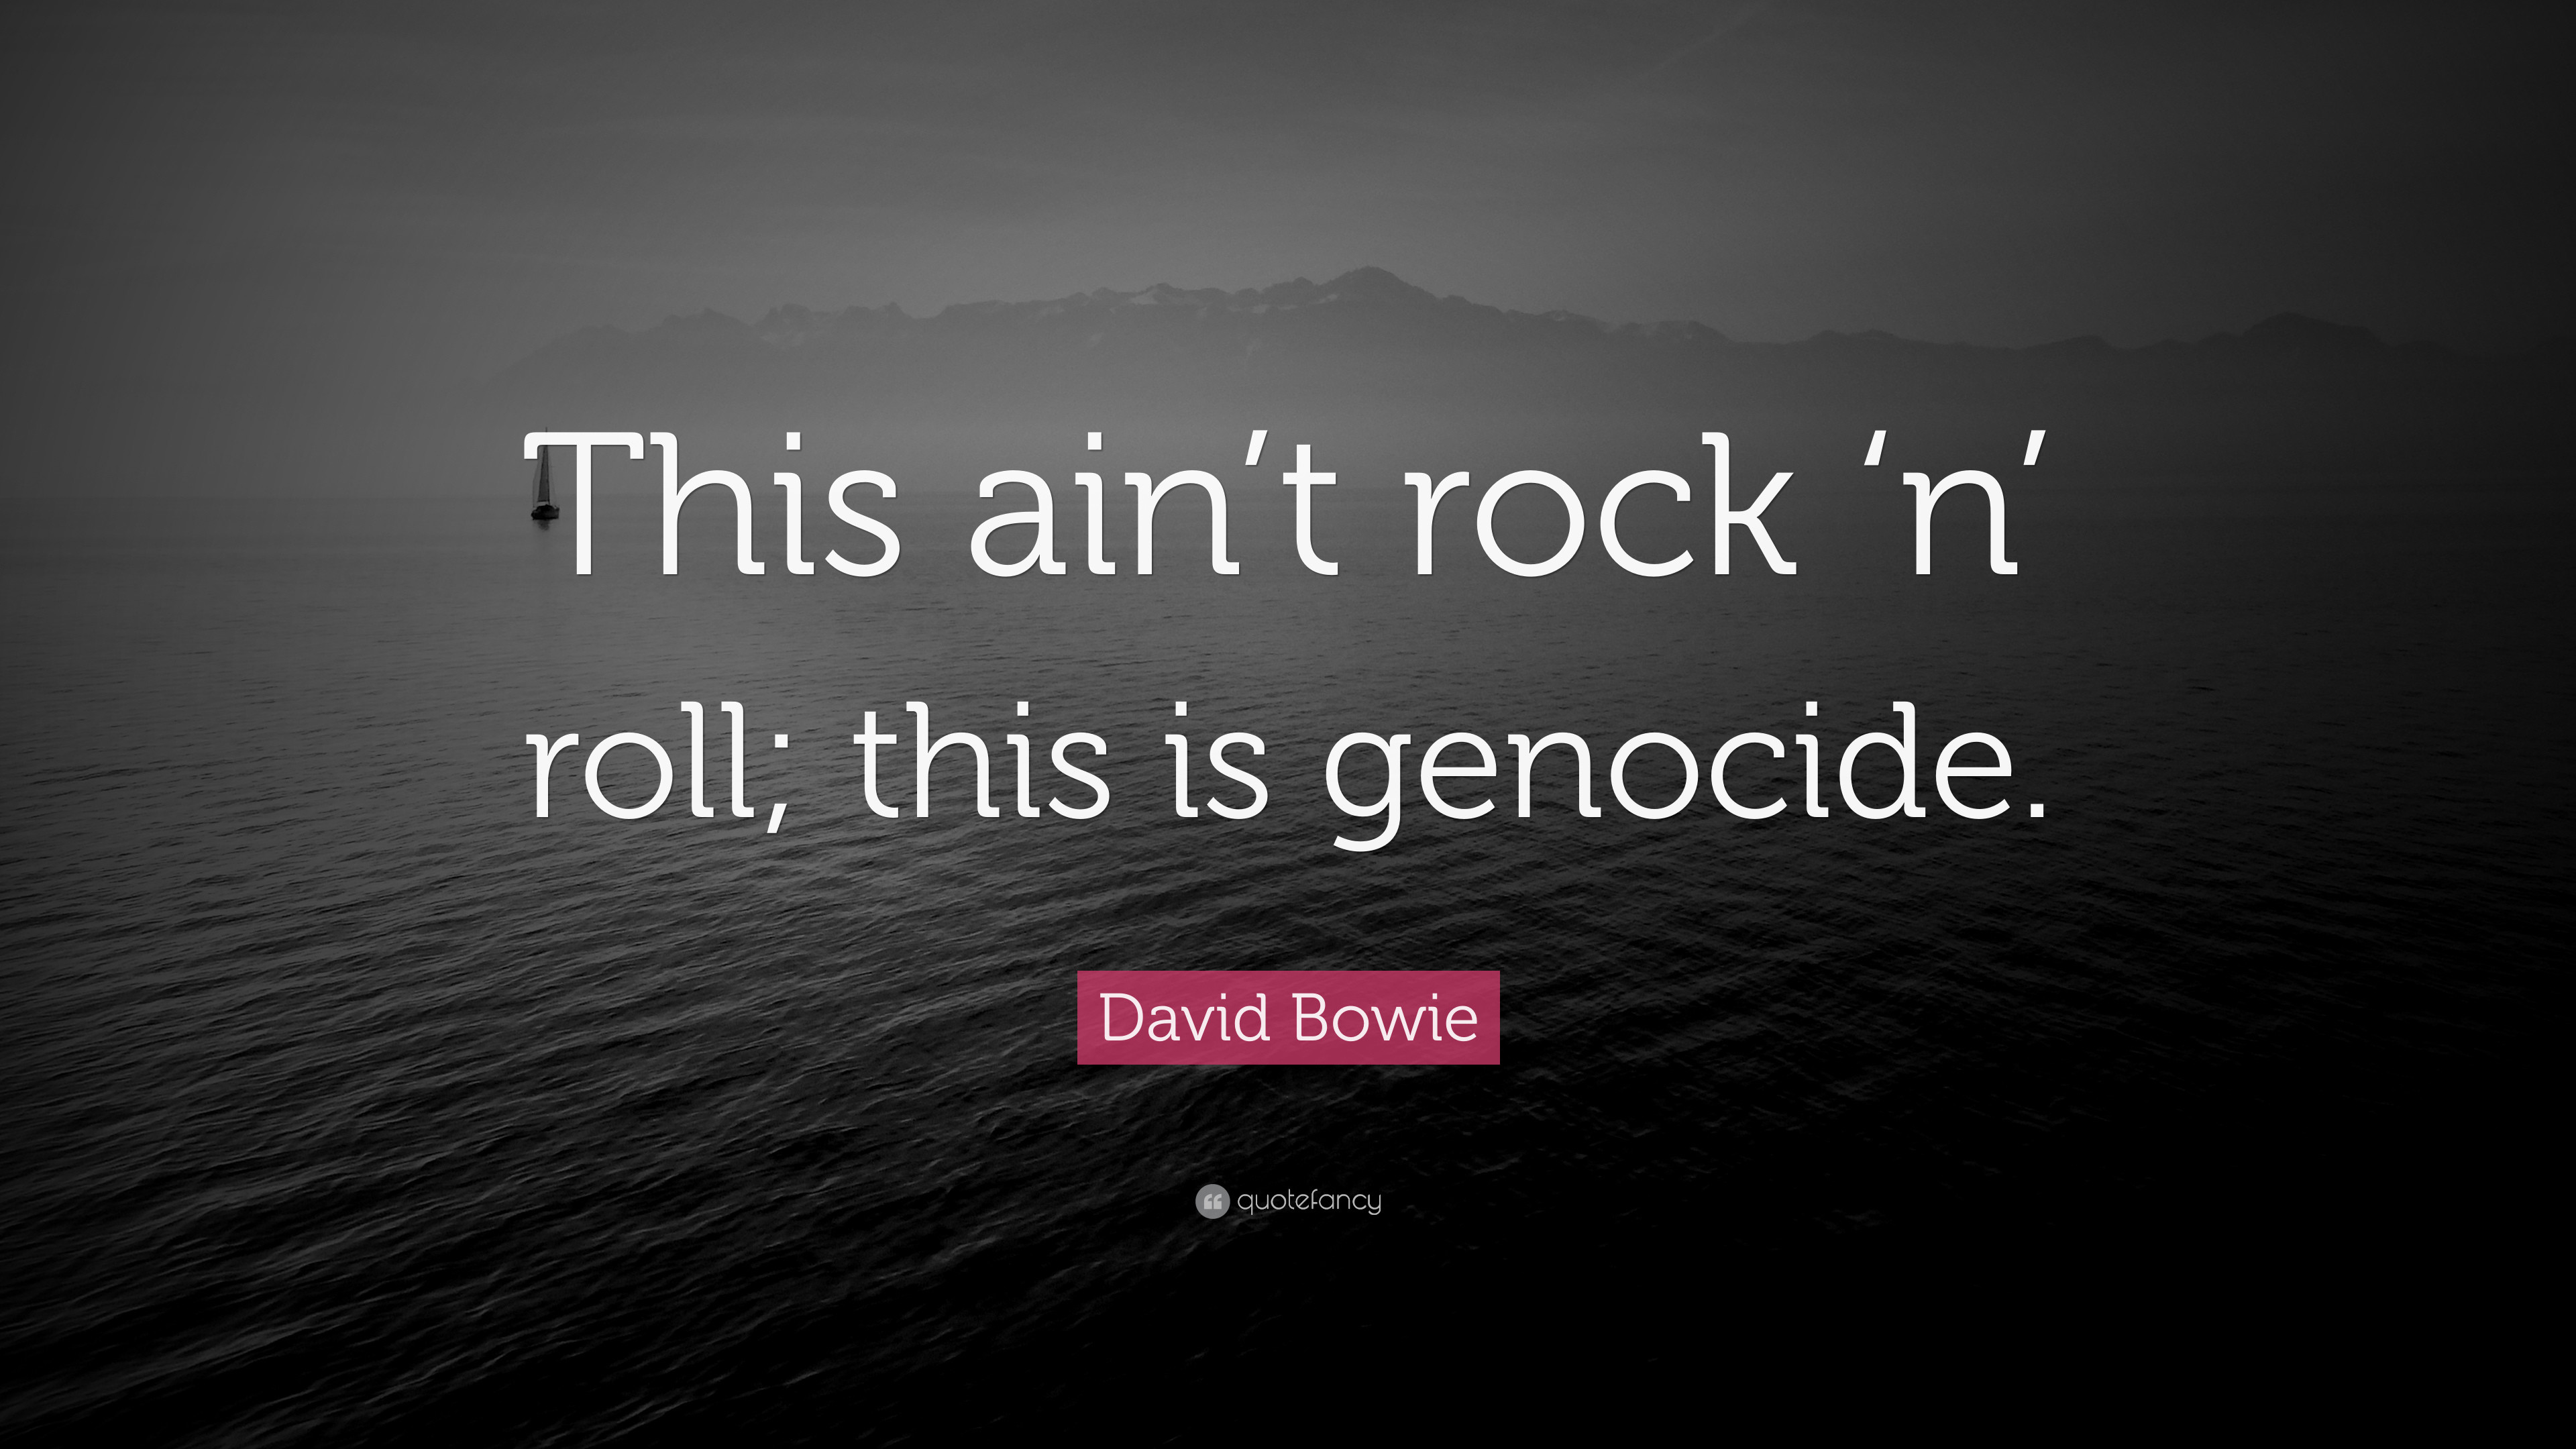 3840x2160 David Bowie Quote: “This ain't rock 'n' roll; this